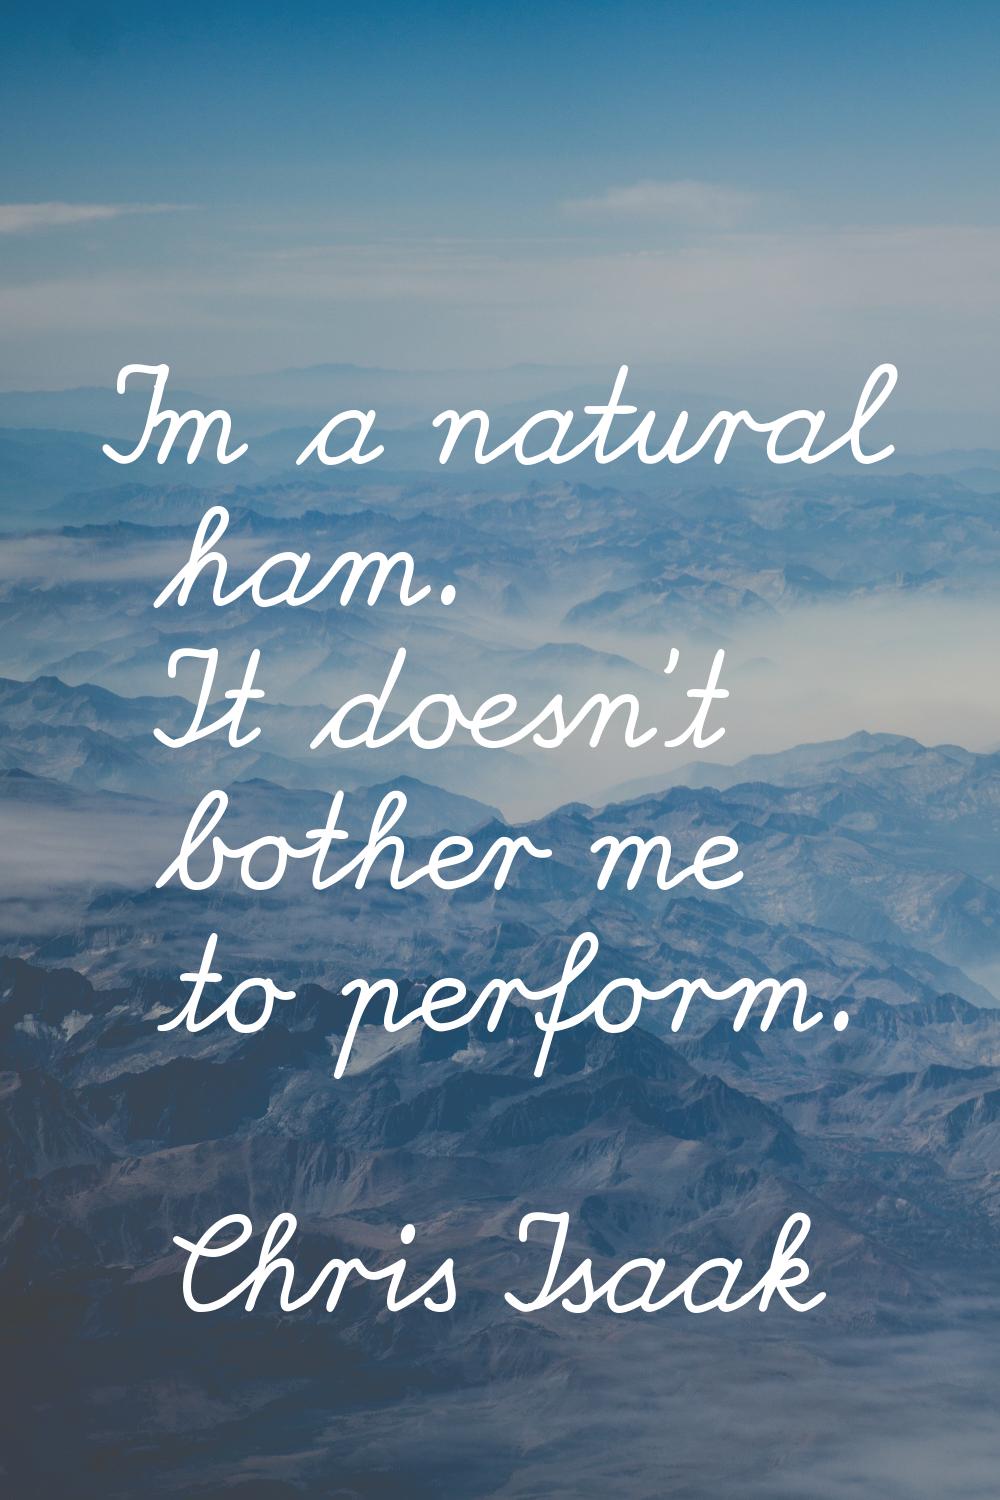 I'm a natural ham. It doesn't bother me to perform.